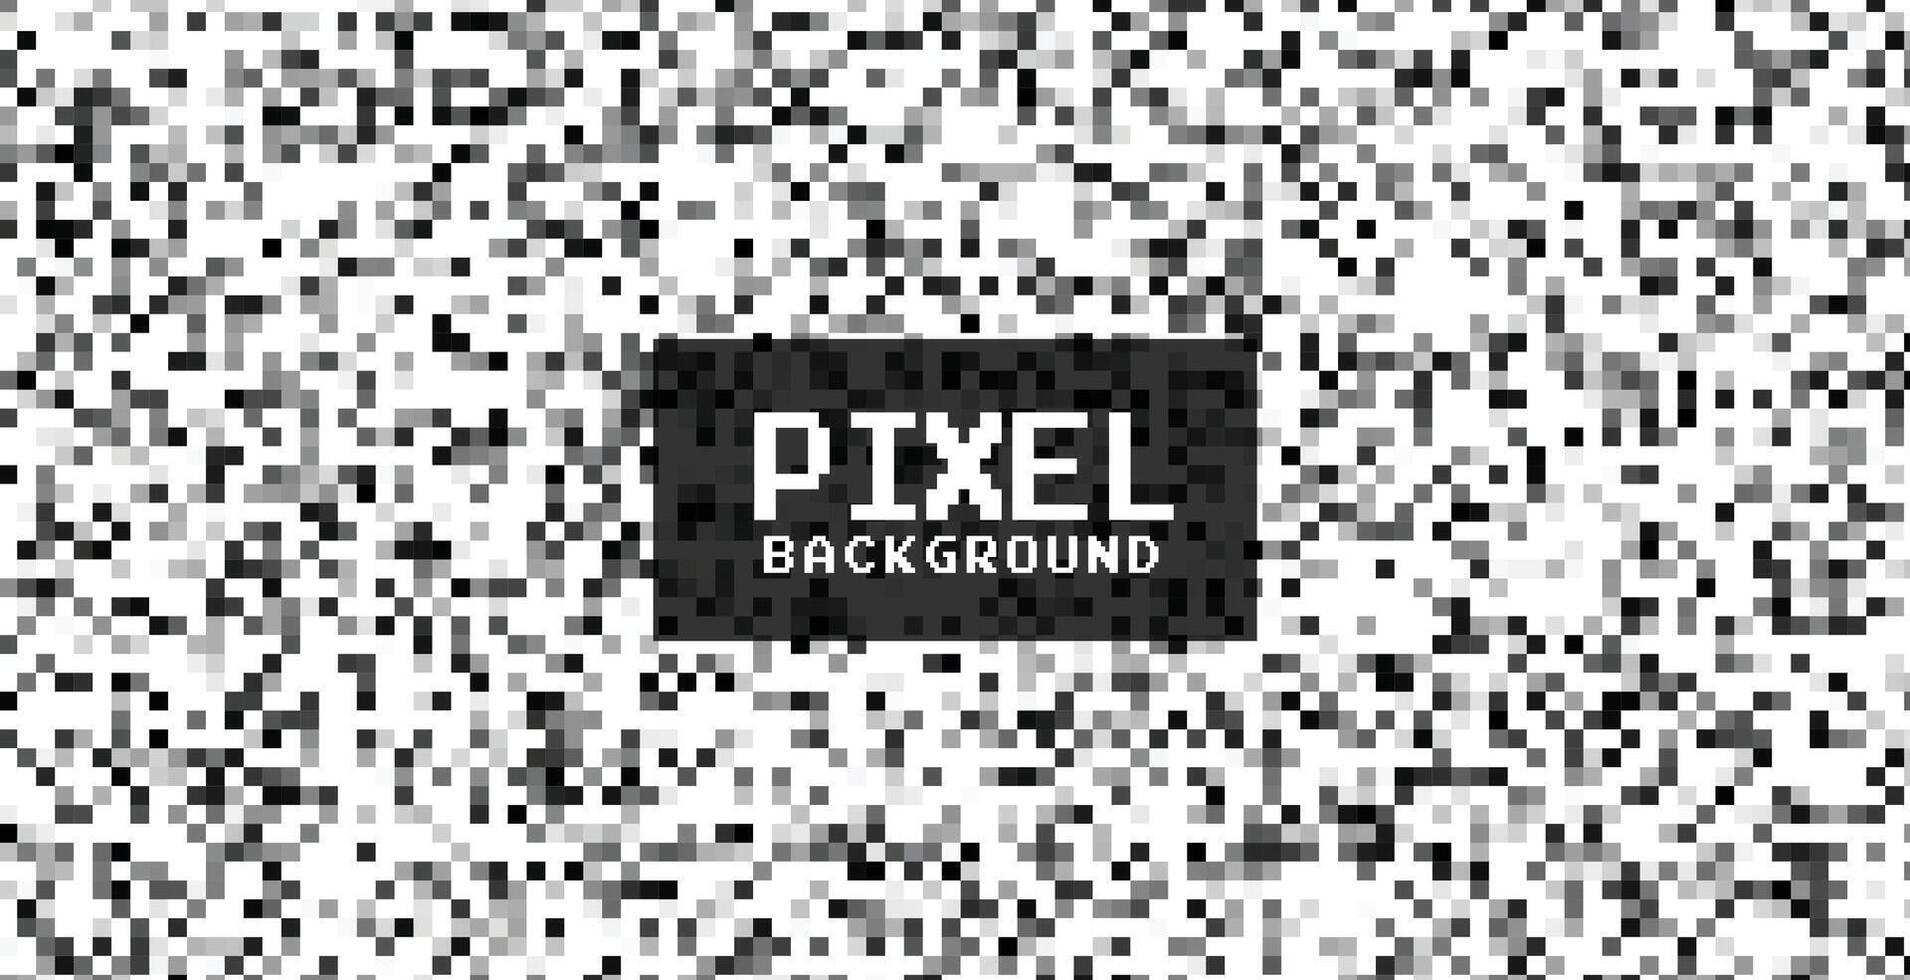 broadcasting no signal pixel black and white background vector